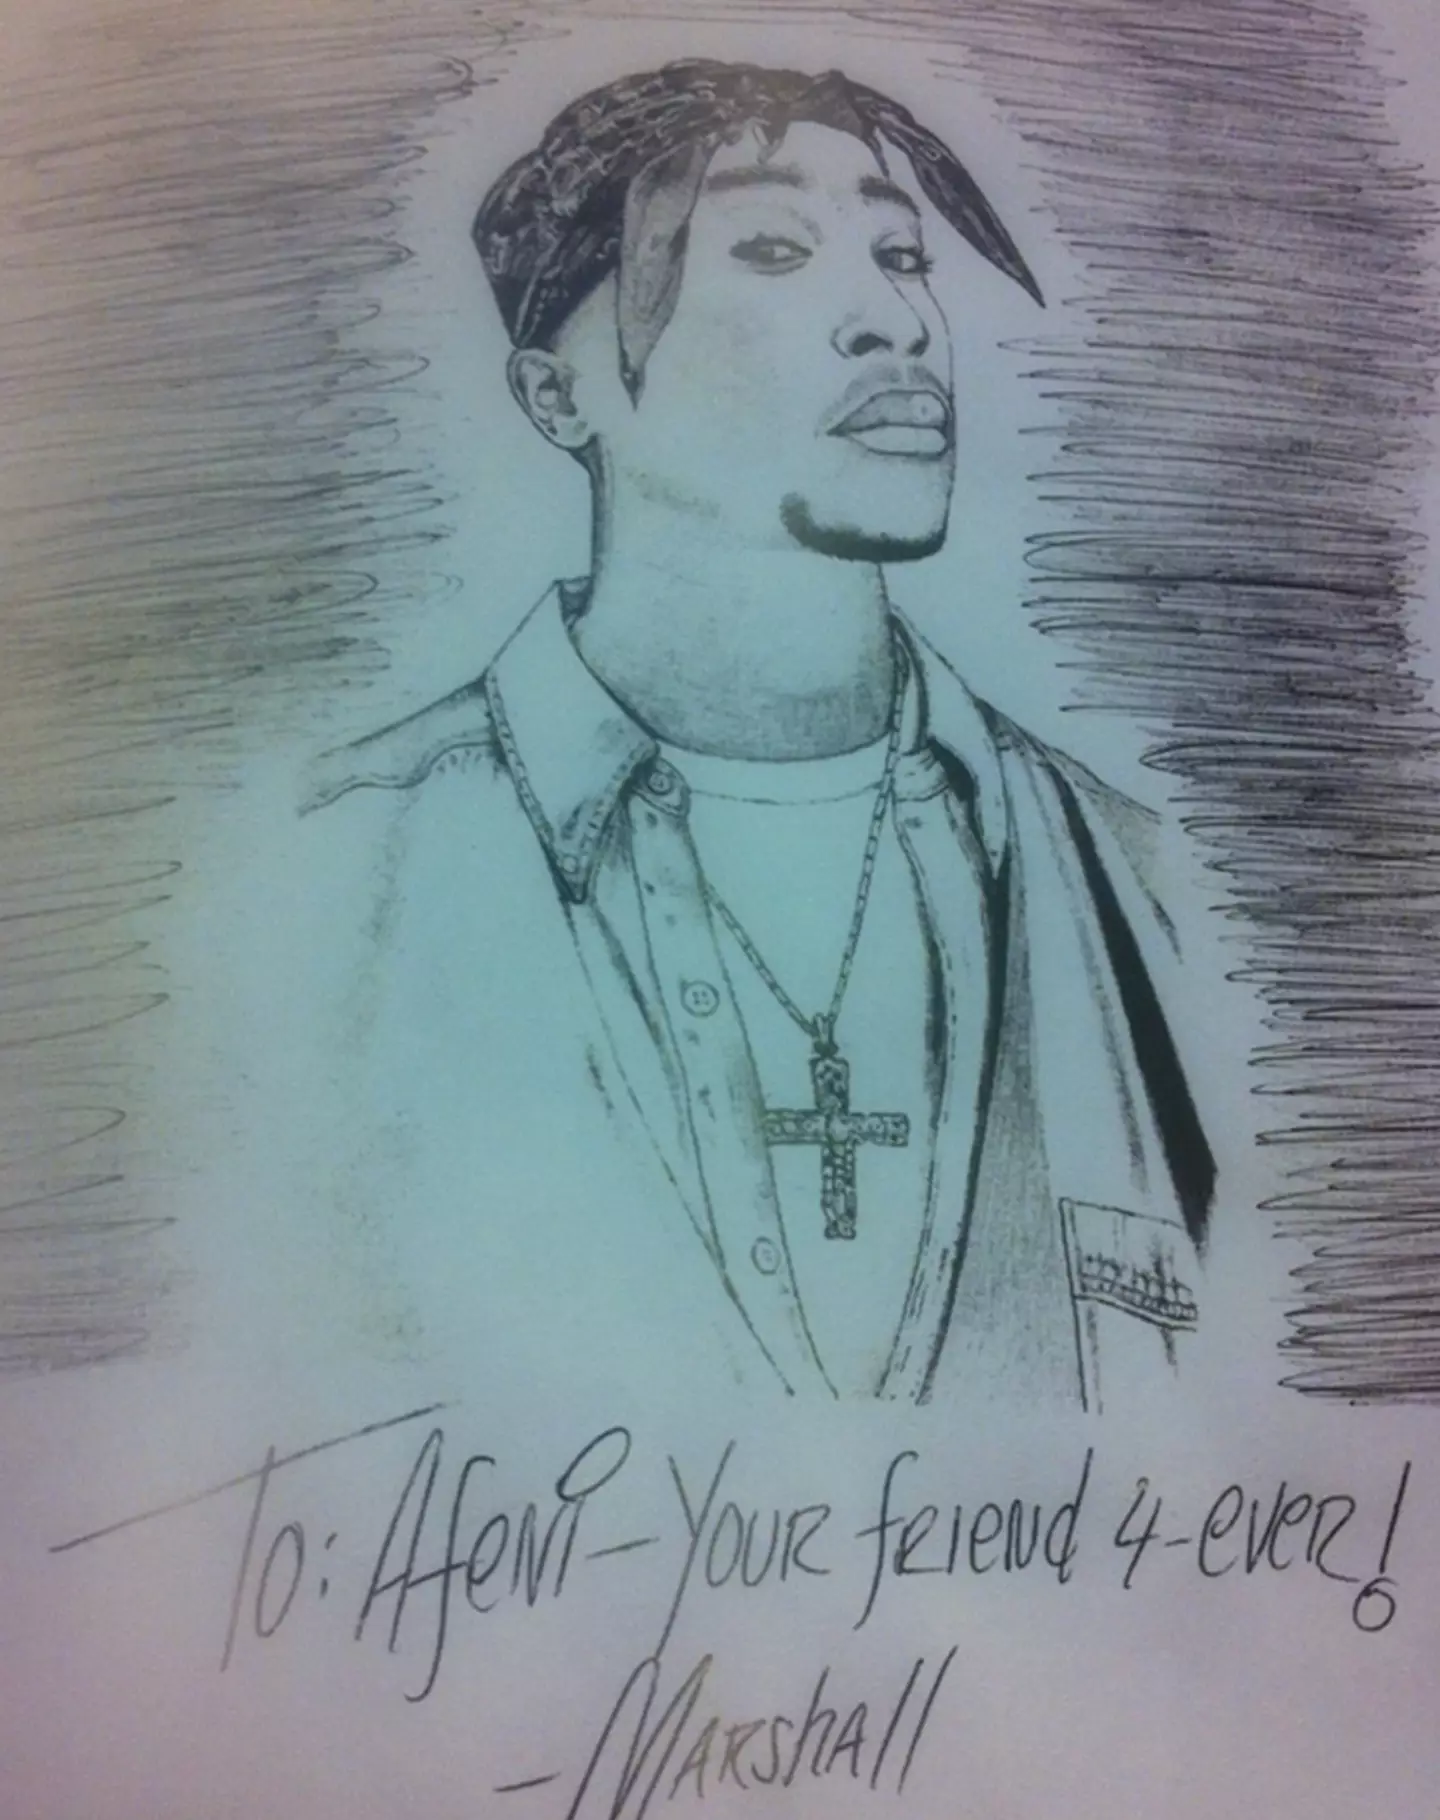 A drawing of Tupac by Eminem.